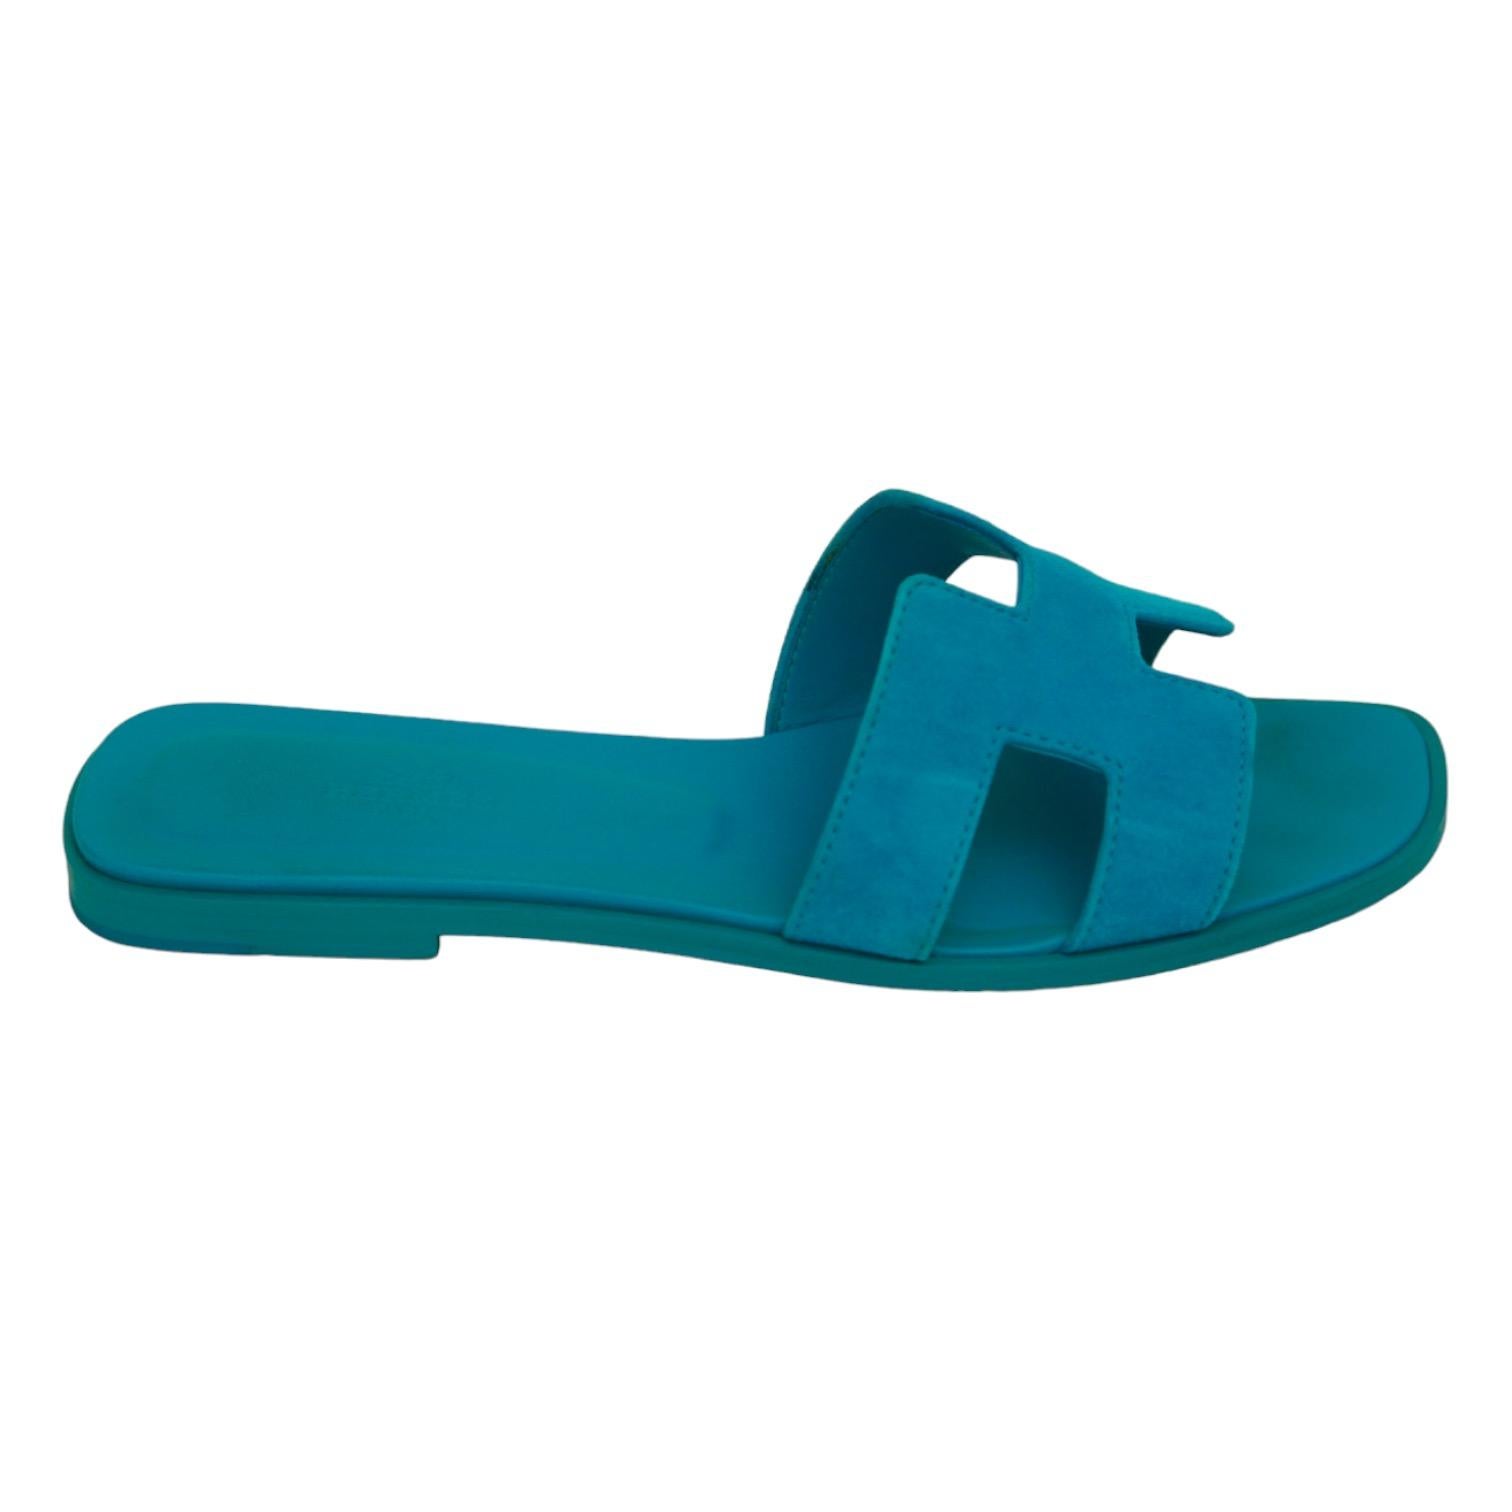 
GUARANTEED AUTHENTIC HERMES BLUE SUEDE ORAN SANDALS

Design:
- Blue suede uppers.
- Hermes H strap over vamp.
- Slip on.
- Leather insole and outsole.
- Comes with dust bag.

Size: 38

Measurements (Approximate):
- Insole: 9.5